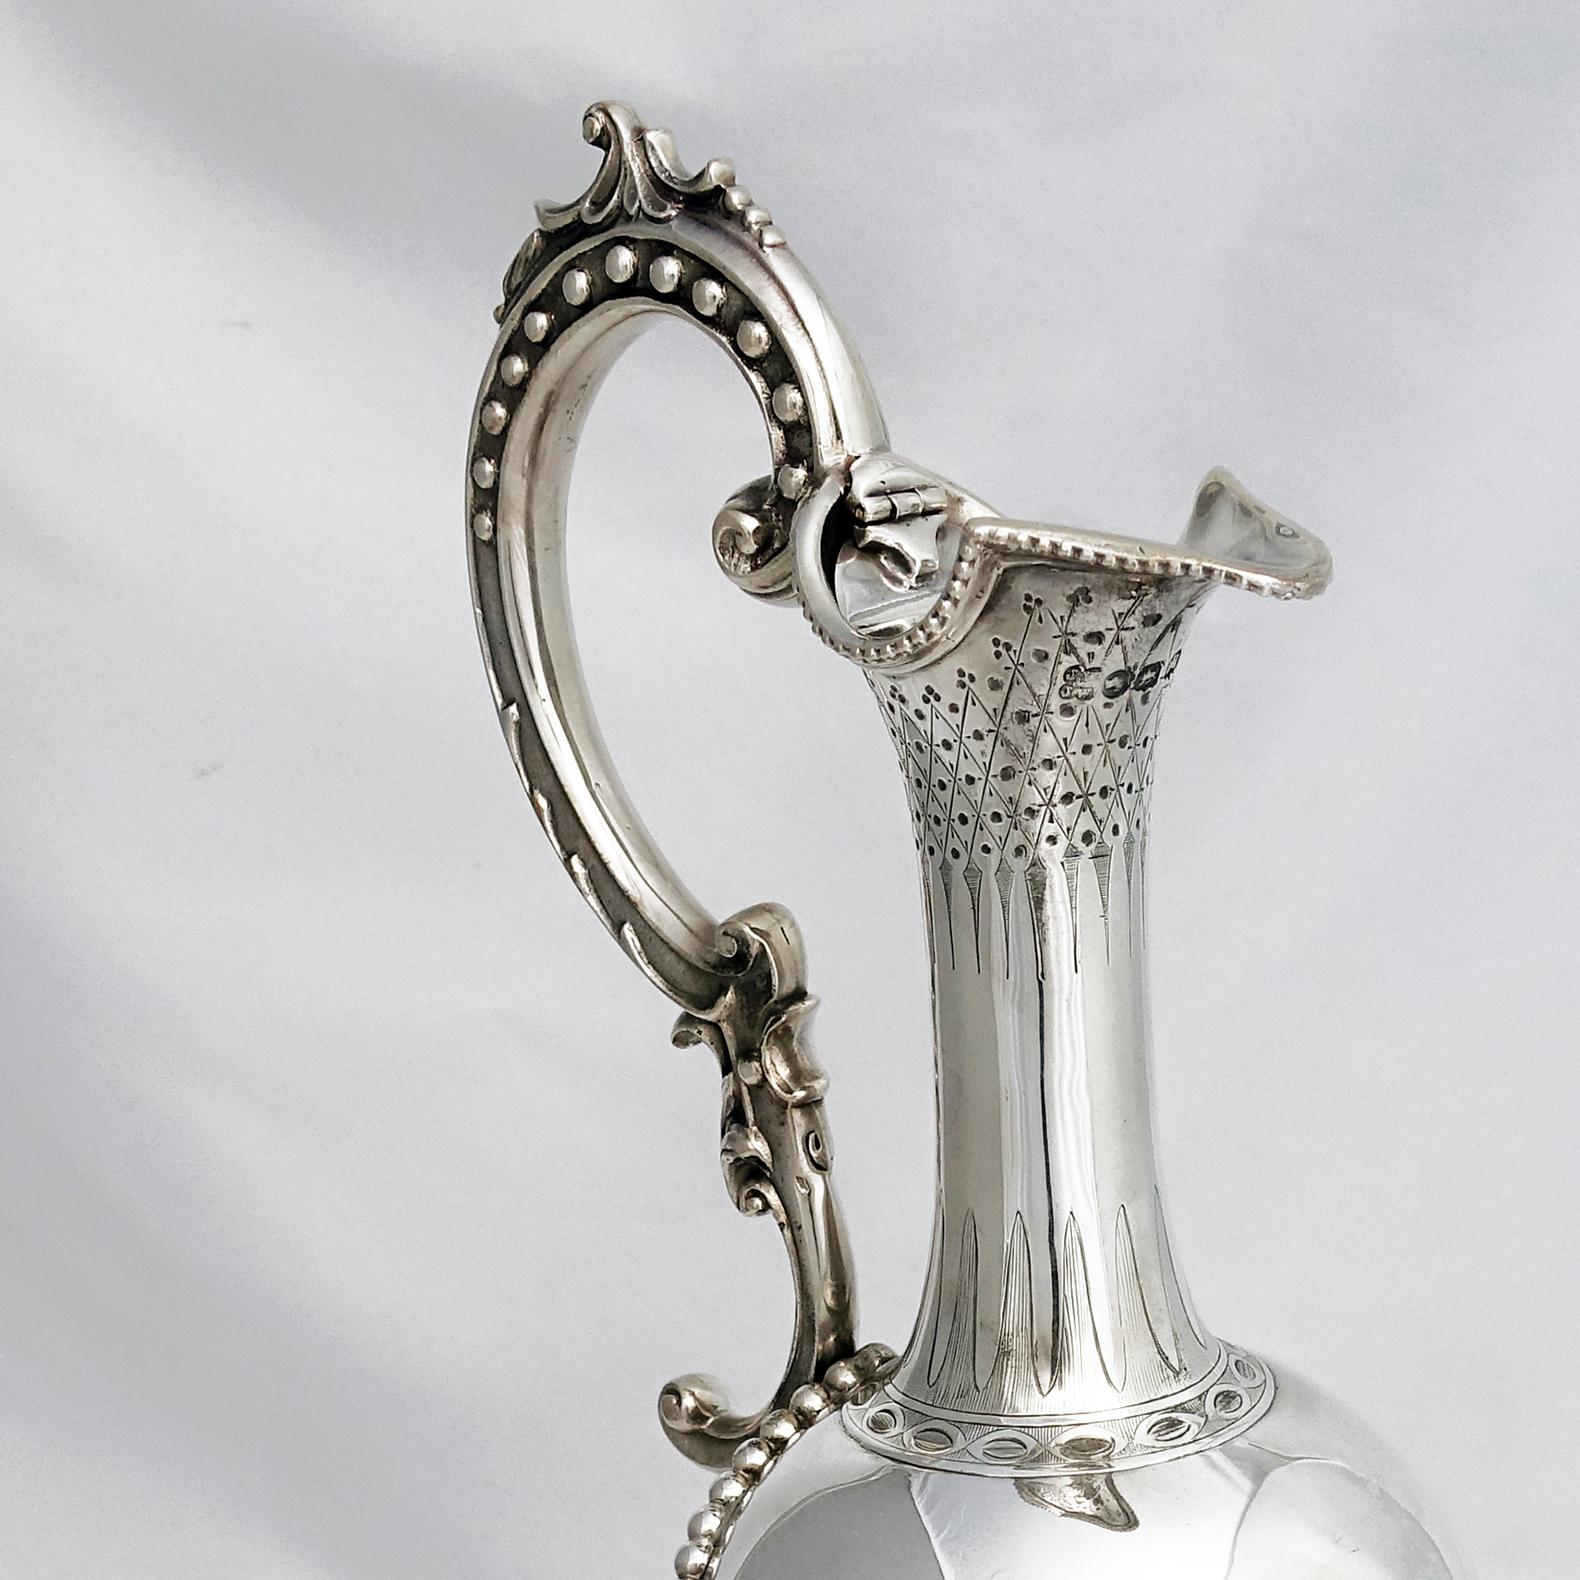 A tall Victorian English sterling silver wine ewer with the unusual hallmark of Exeter. 
This handcrafted piece has elegant strap work curving around the urn shaped body and finishing at the narrow neck.